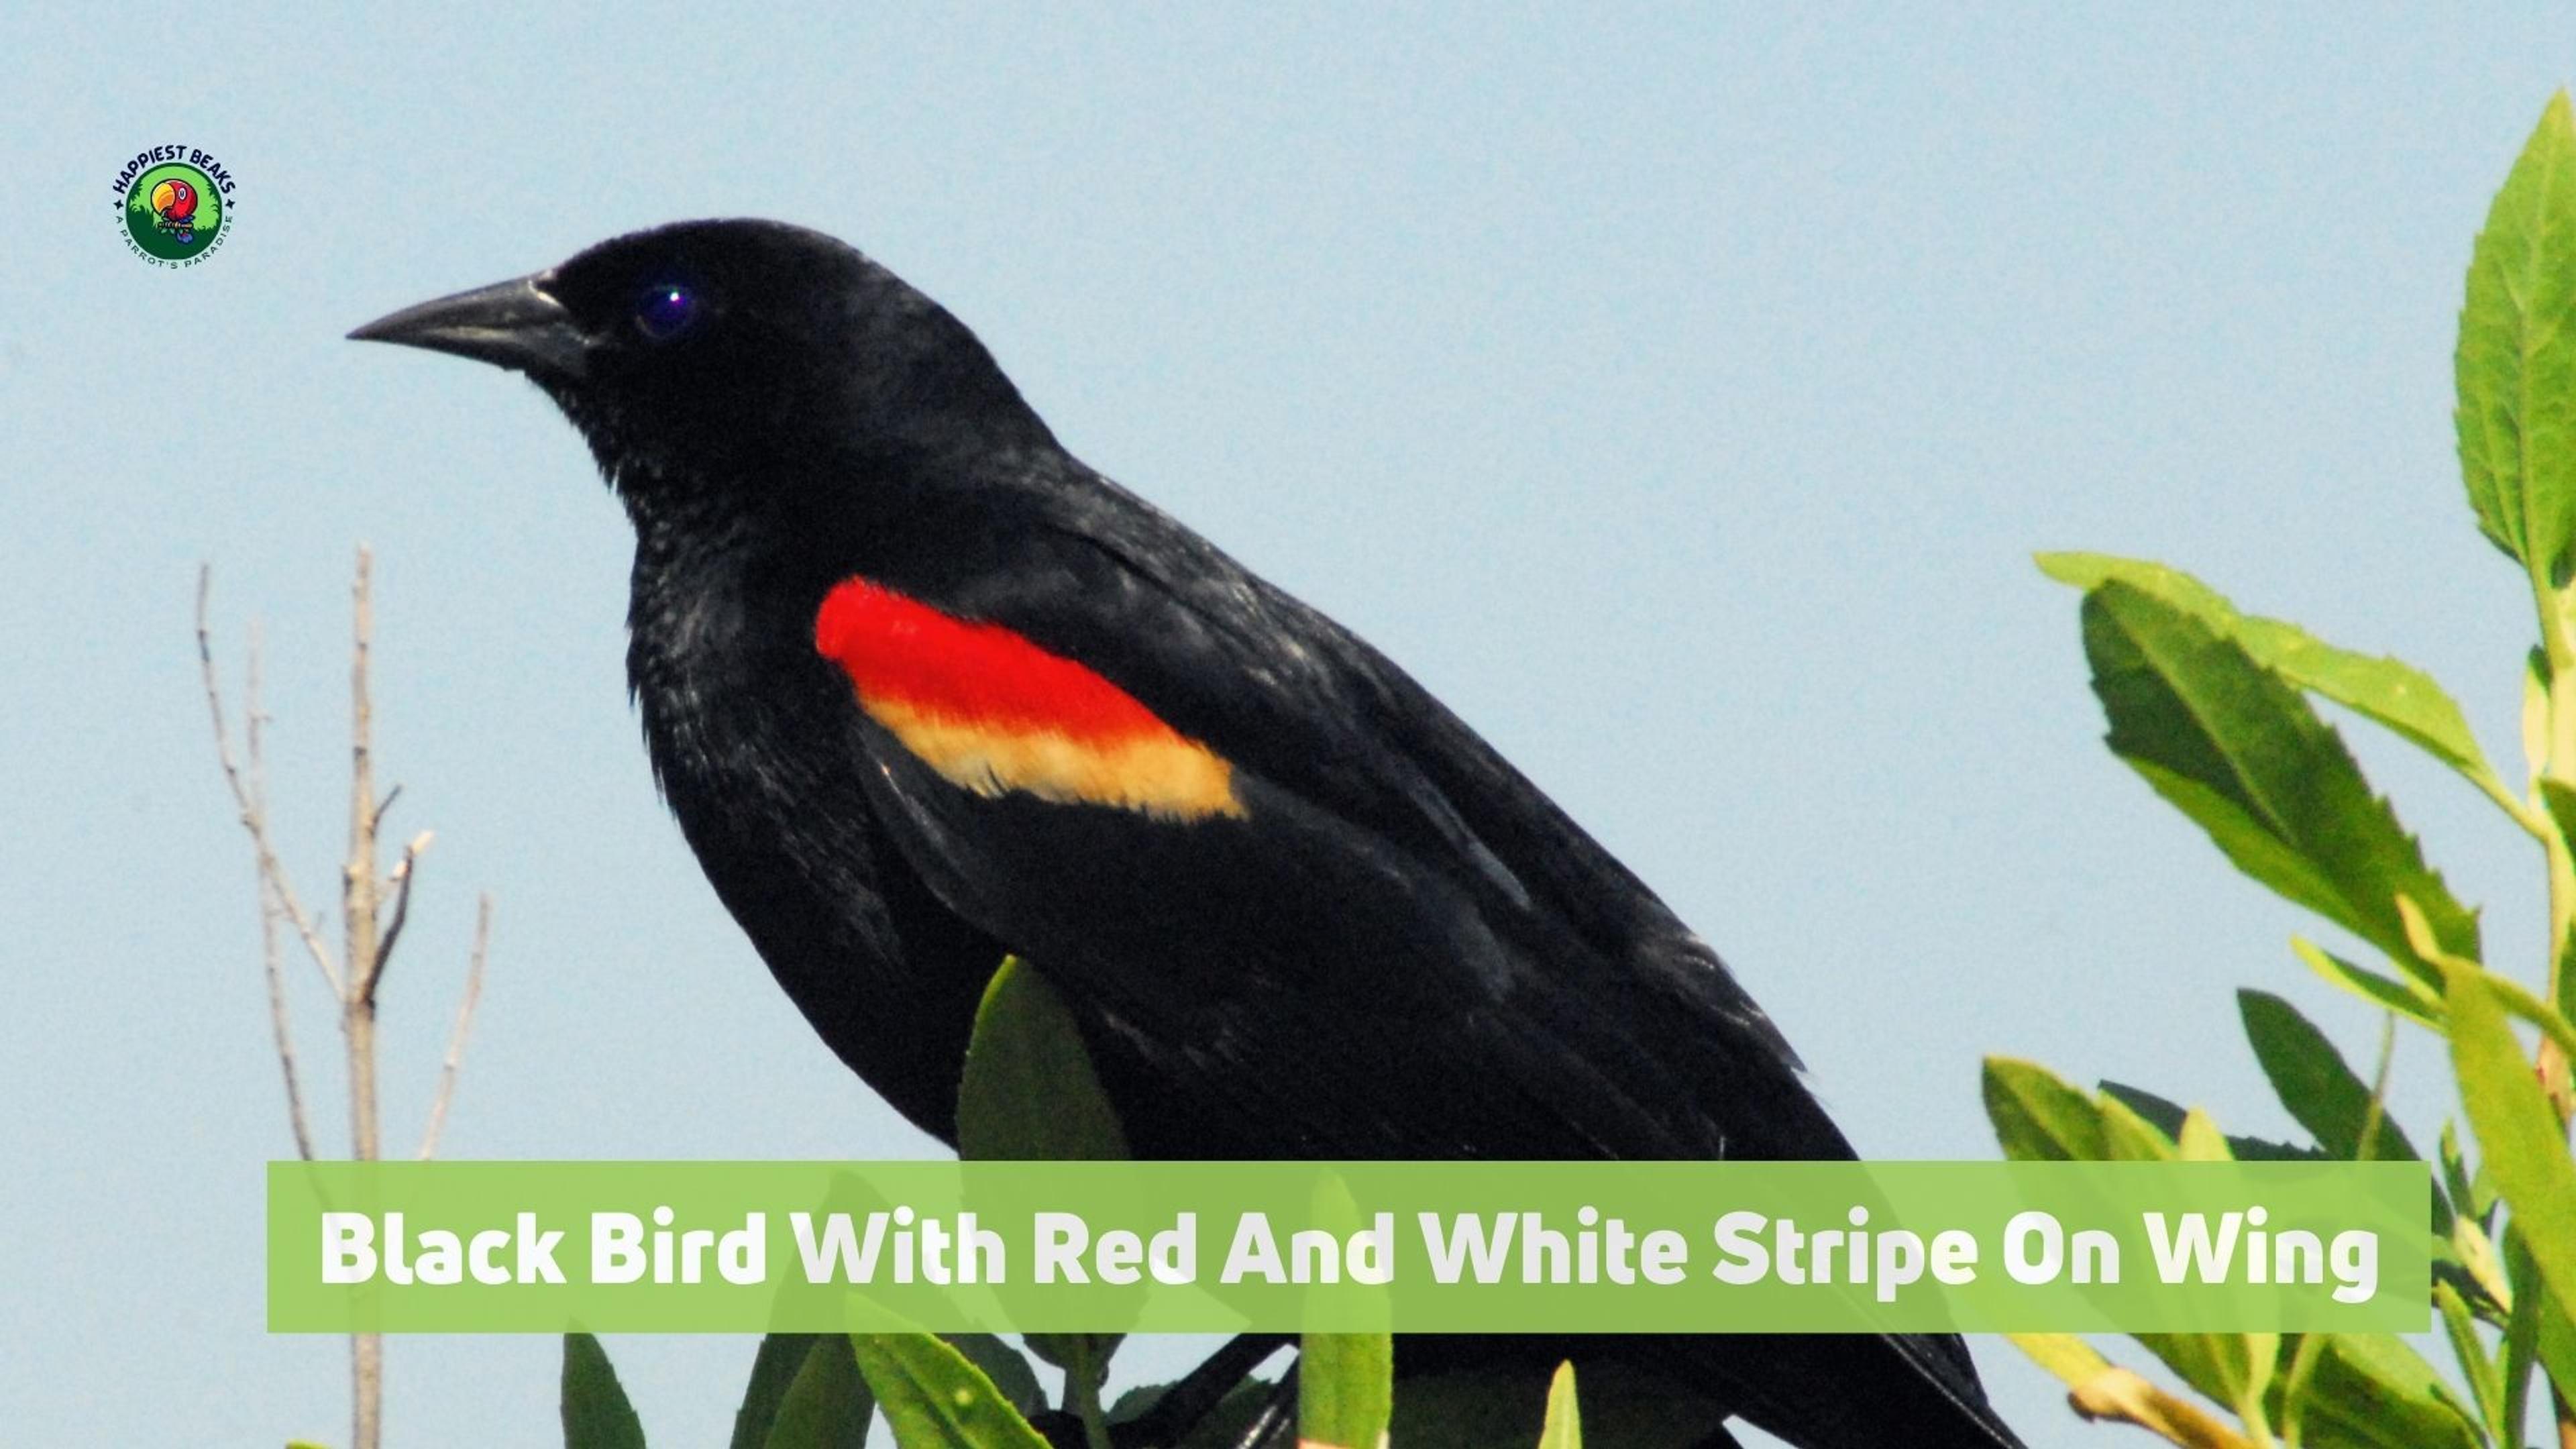 Black Bird With Red And White Stripe On Wing